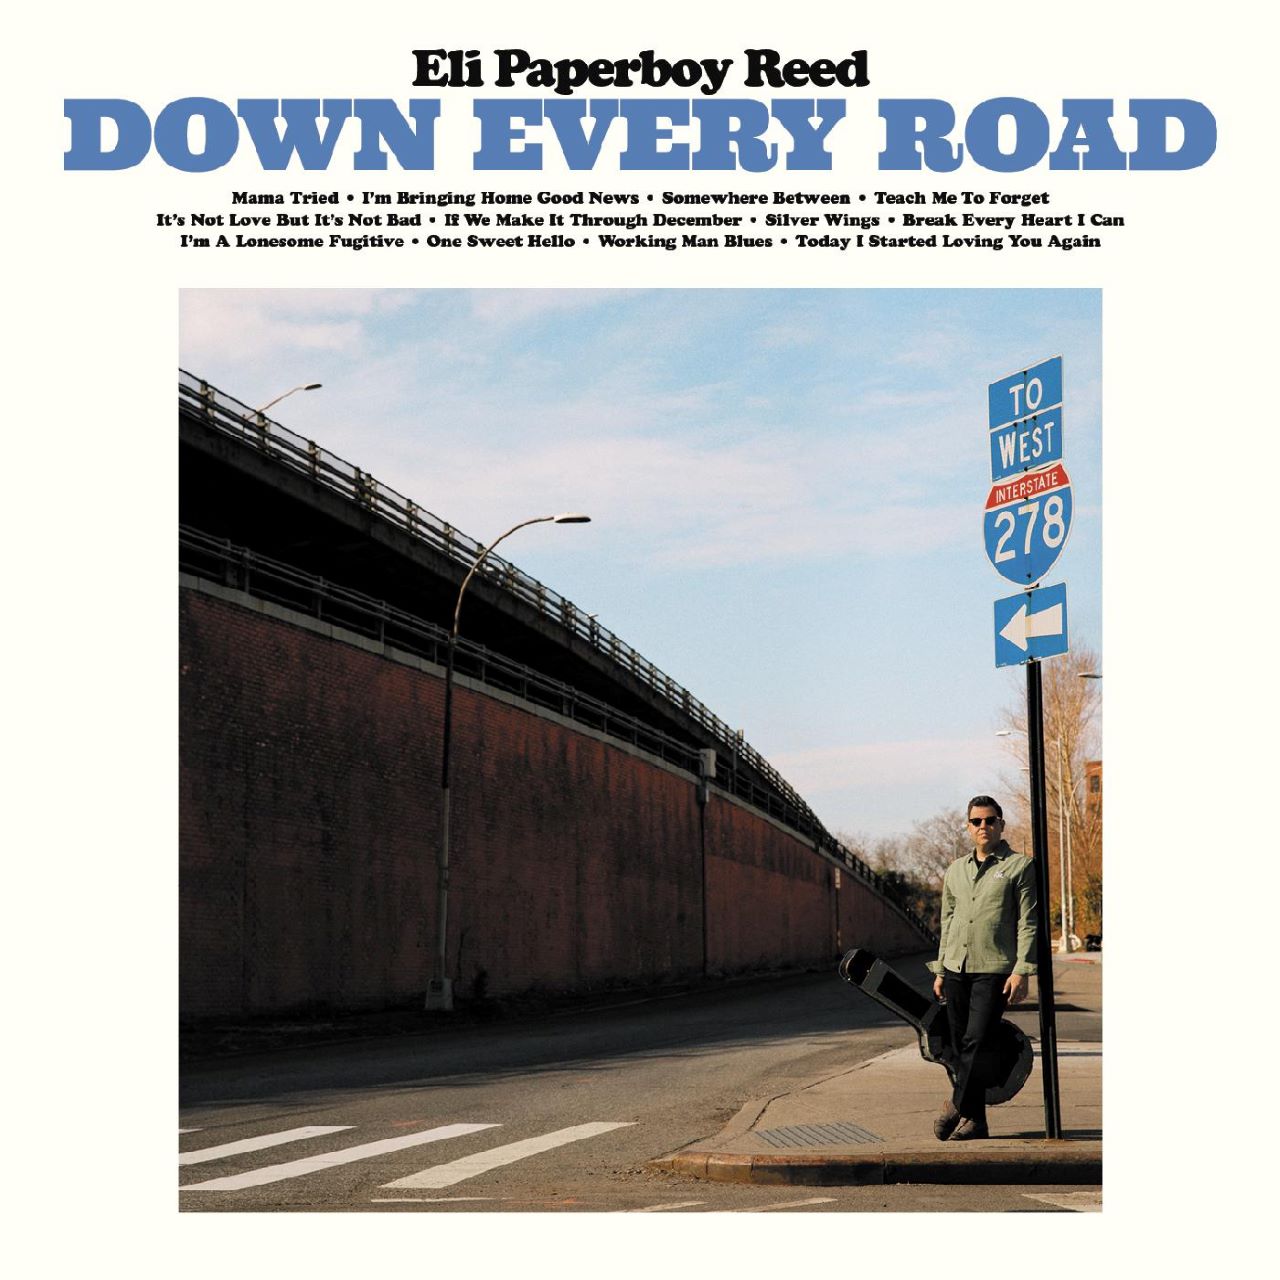 Eli Paperboy Reed – Down Every Road cover album